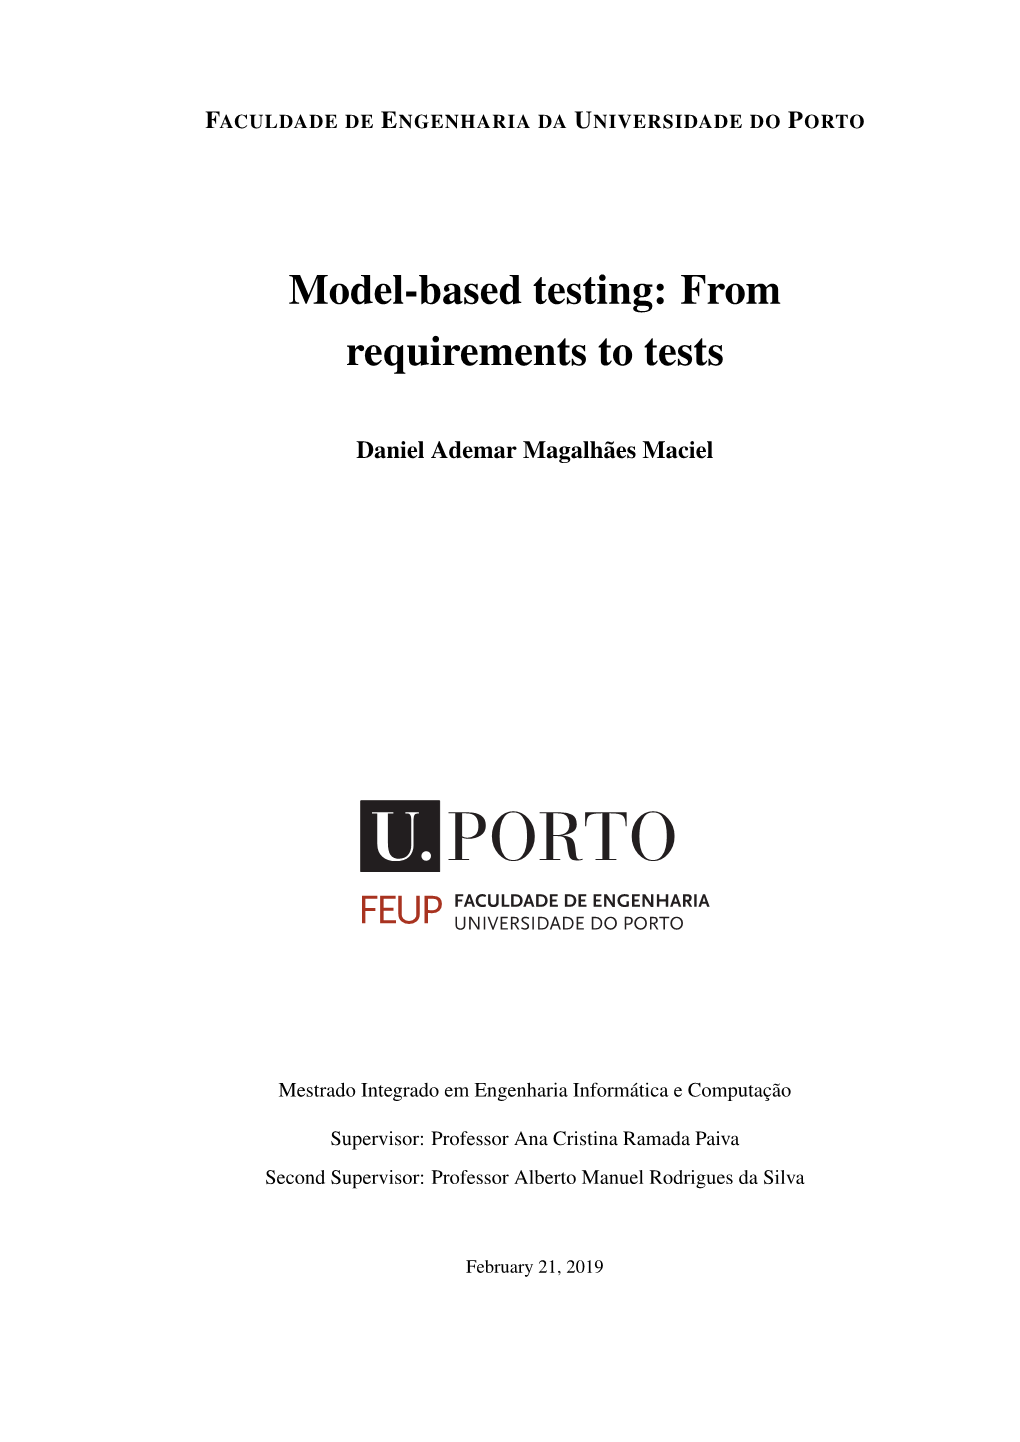 Model-Based Testing: from Requirements to Tests